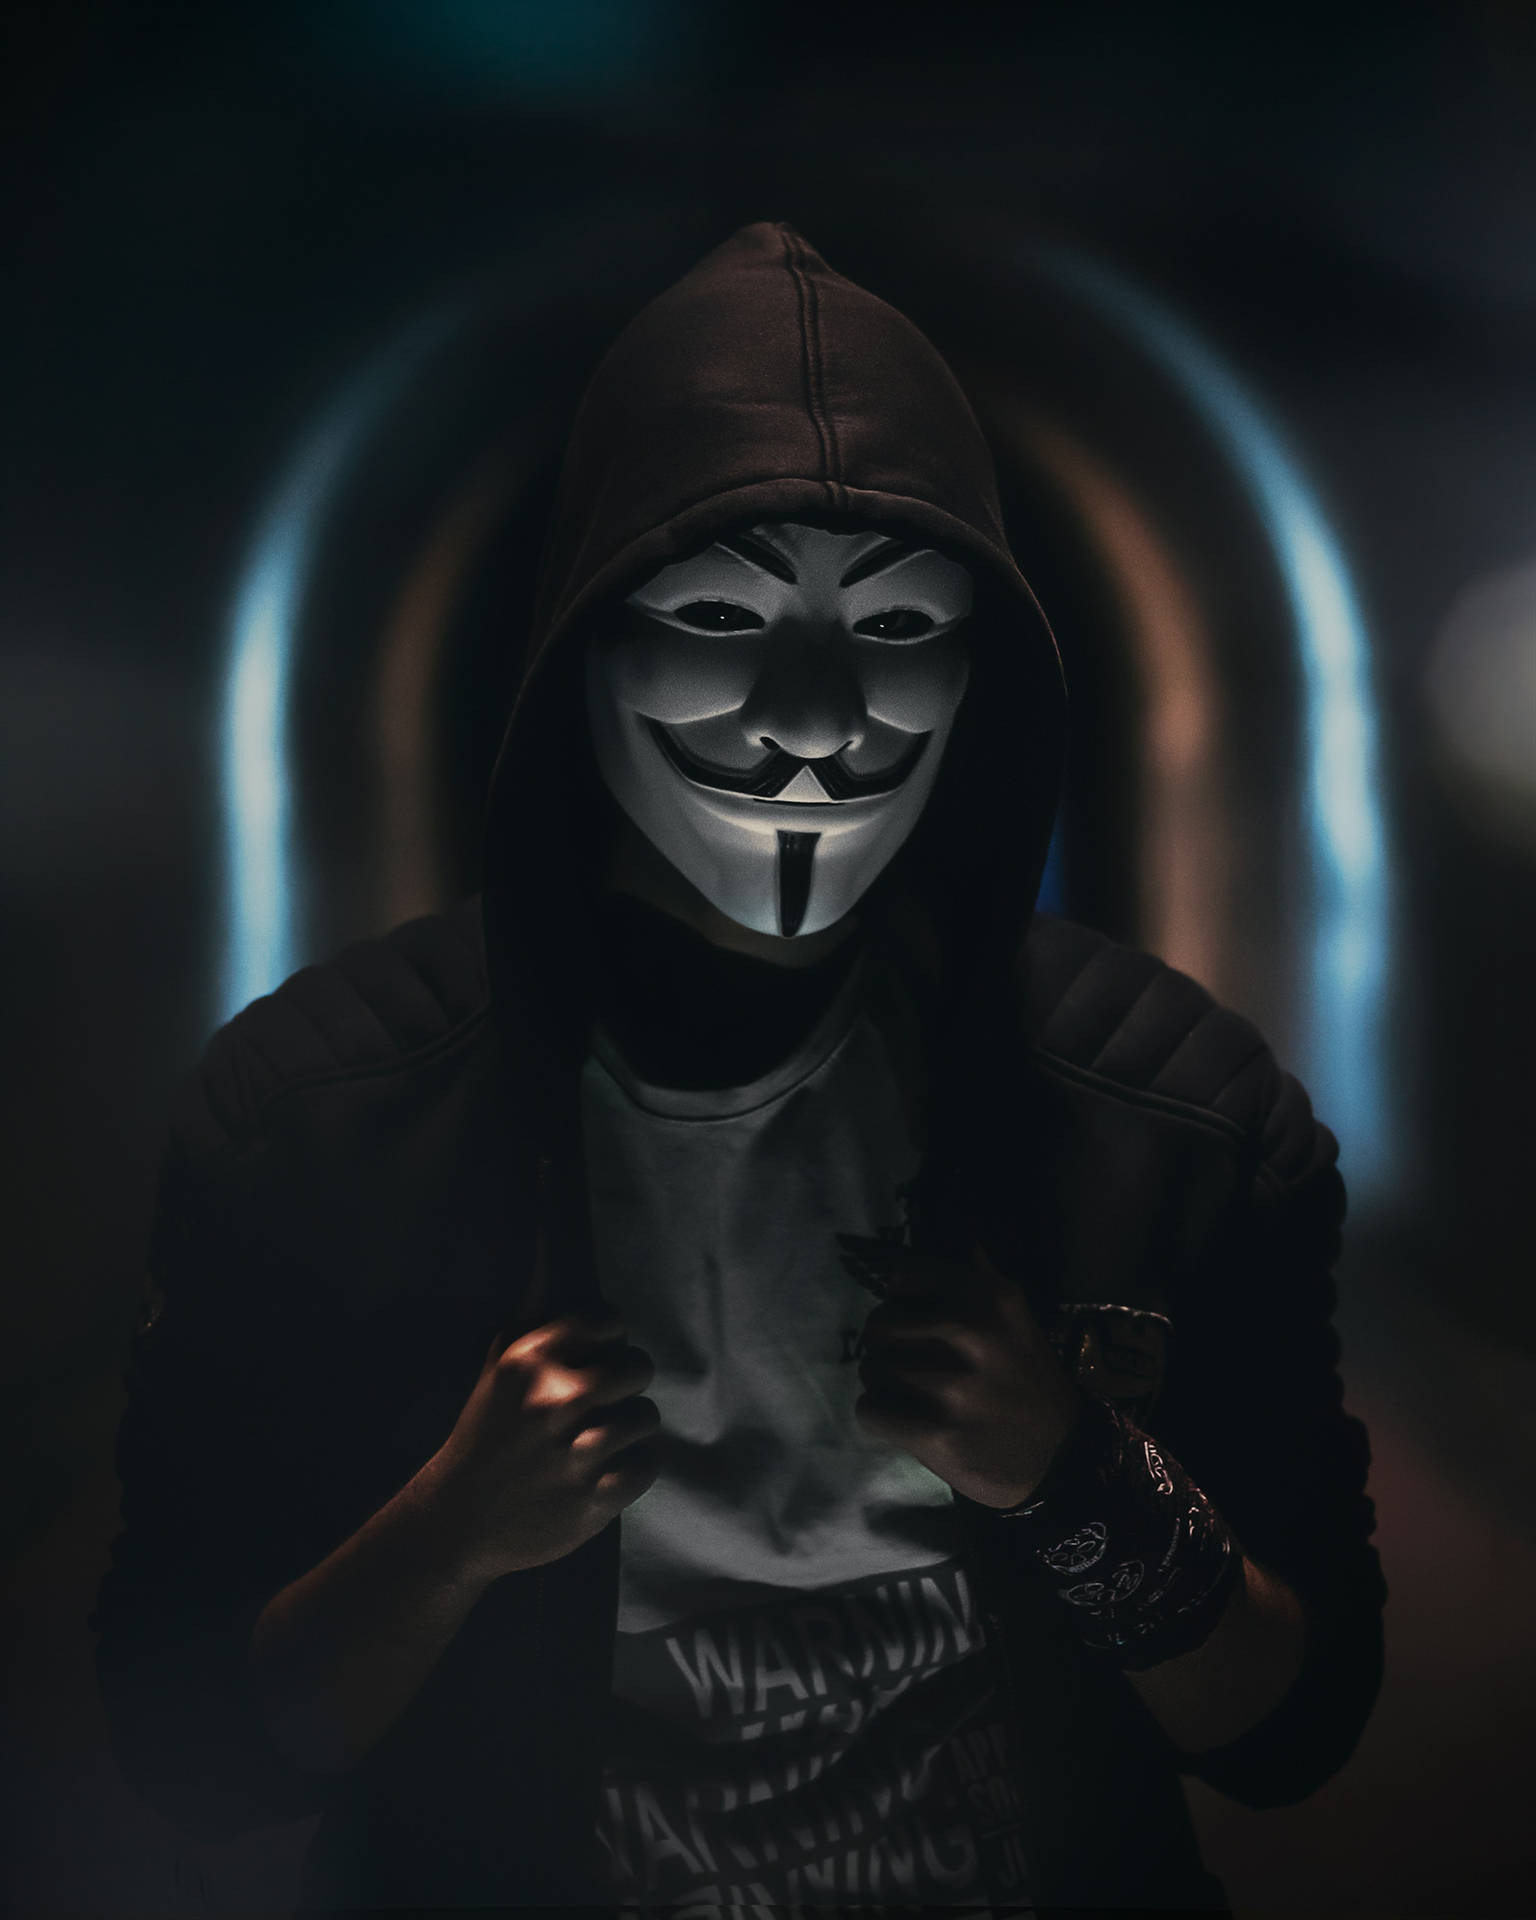 Anonymous Wallpaper APK - Free download for Android